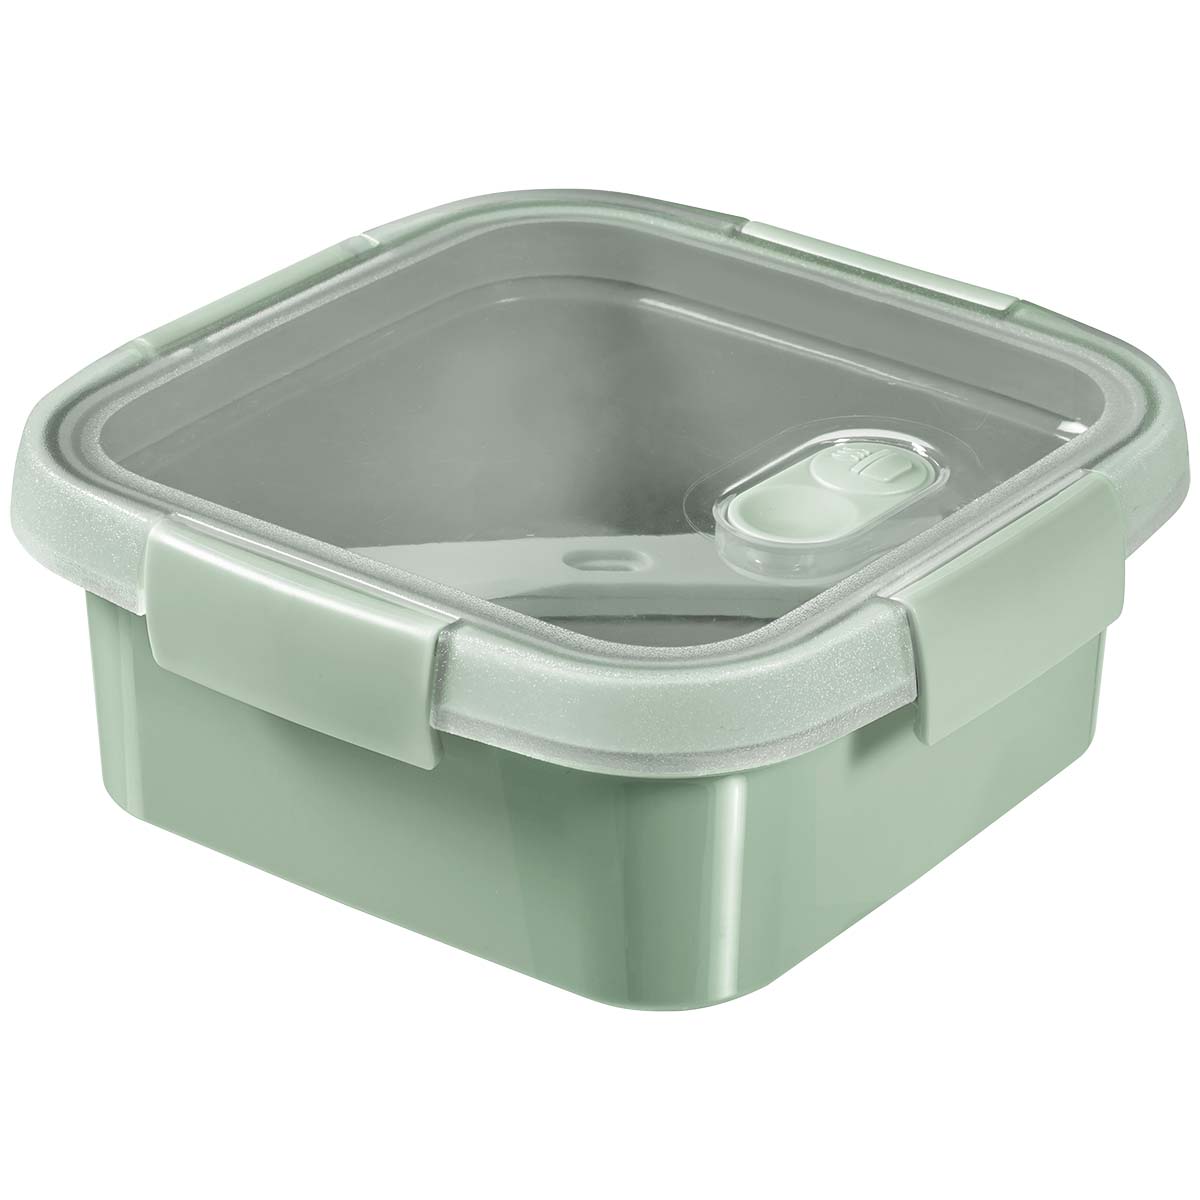 6302231 Lid with 4 sturdy clips and a flexible seal to keep the contents fresh and prevent leaks. Includes a cutlery set with a fork, knife, and spoon. Steam valve on the lid for easy use in the microwave. Made of 100% recycled polypropylene.